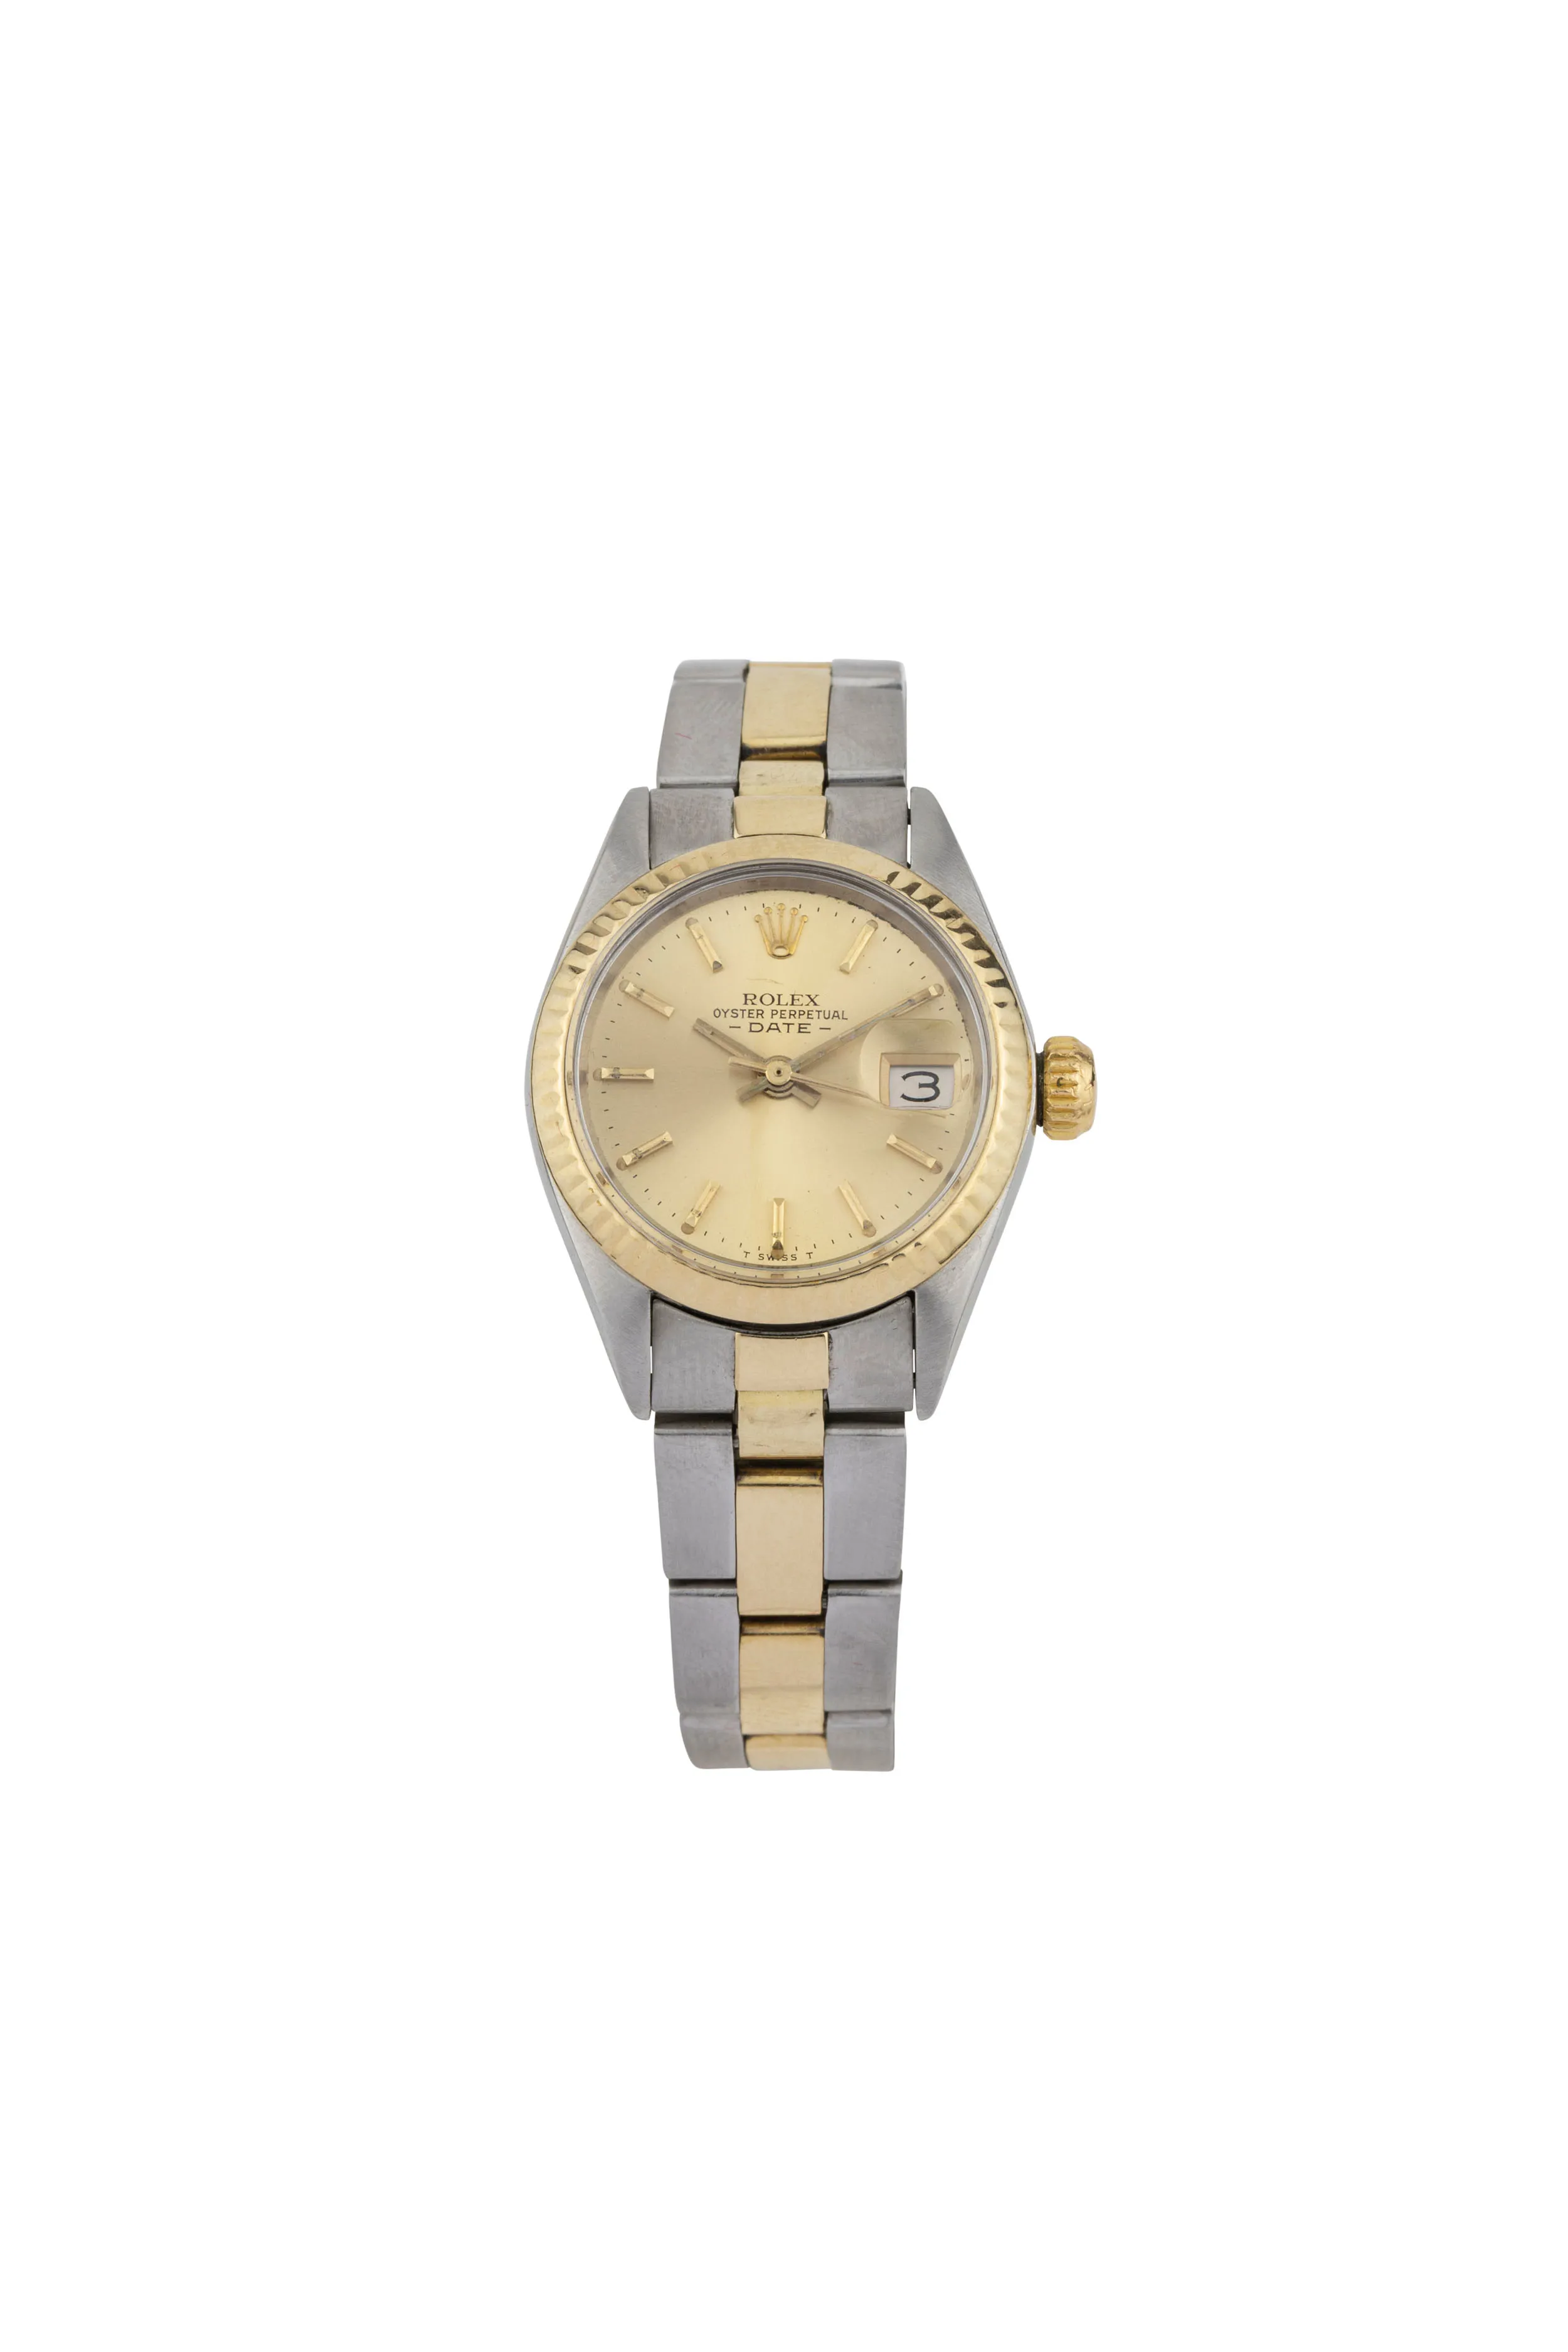 Rolex Datejust 6917 25mm Stainless steel and gold